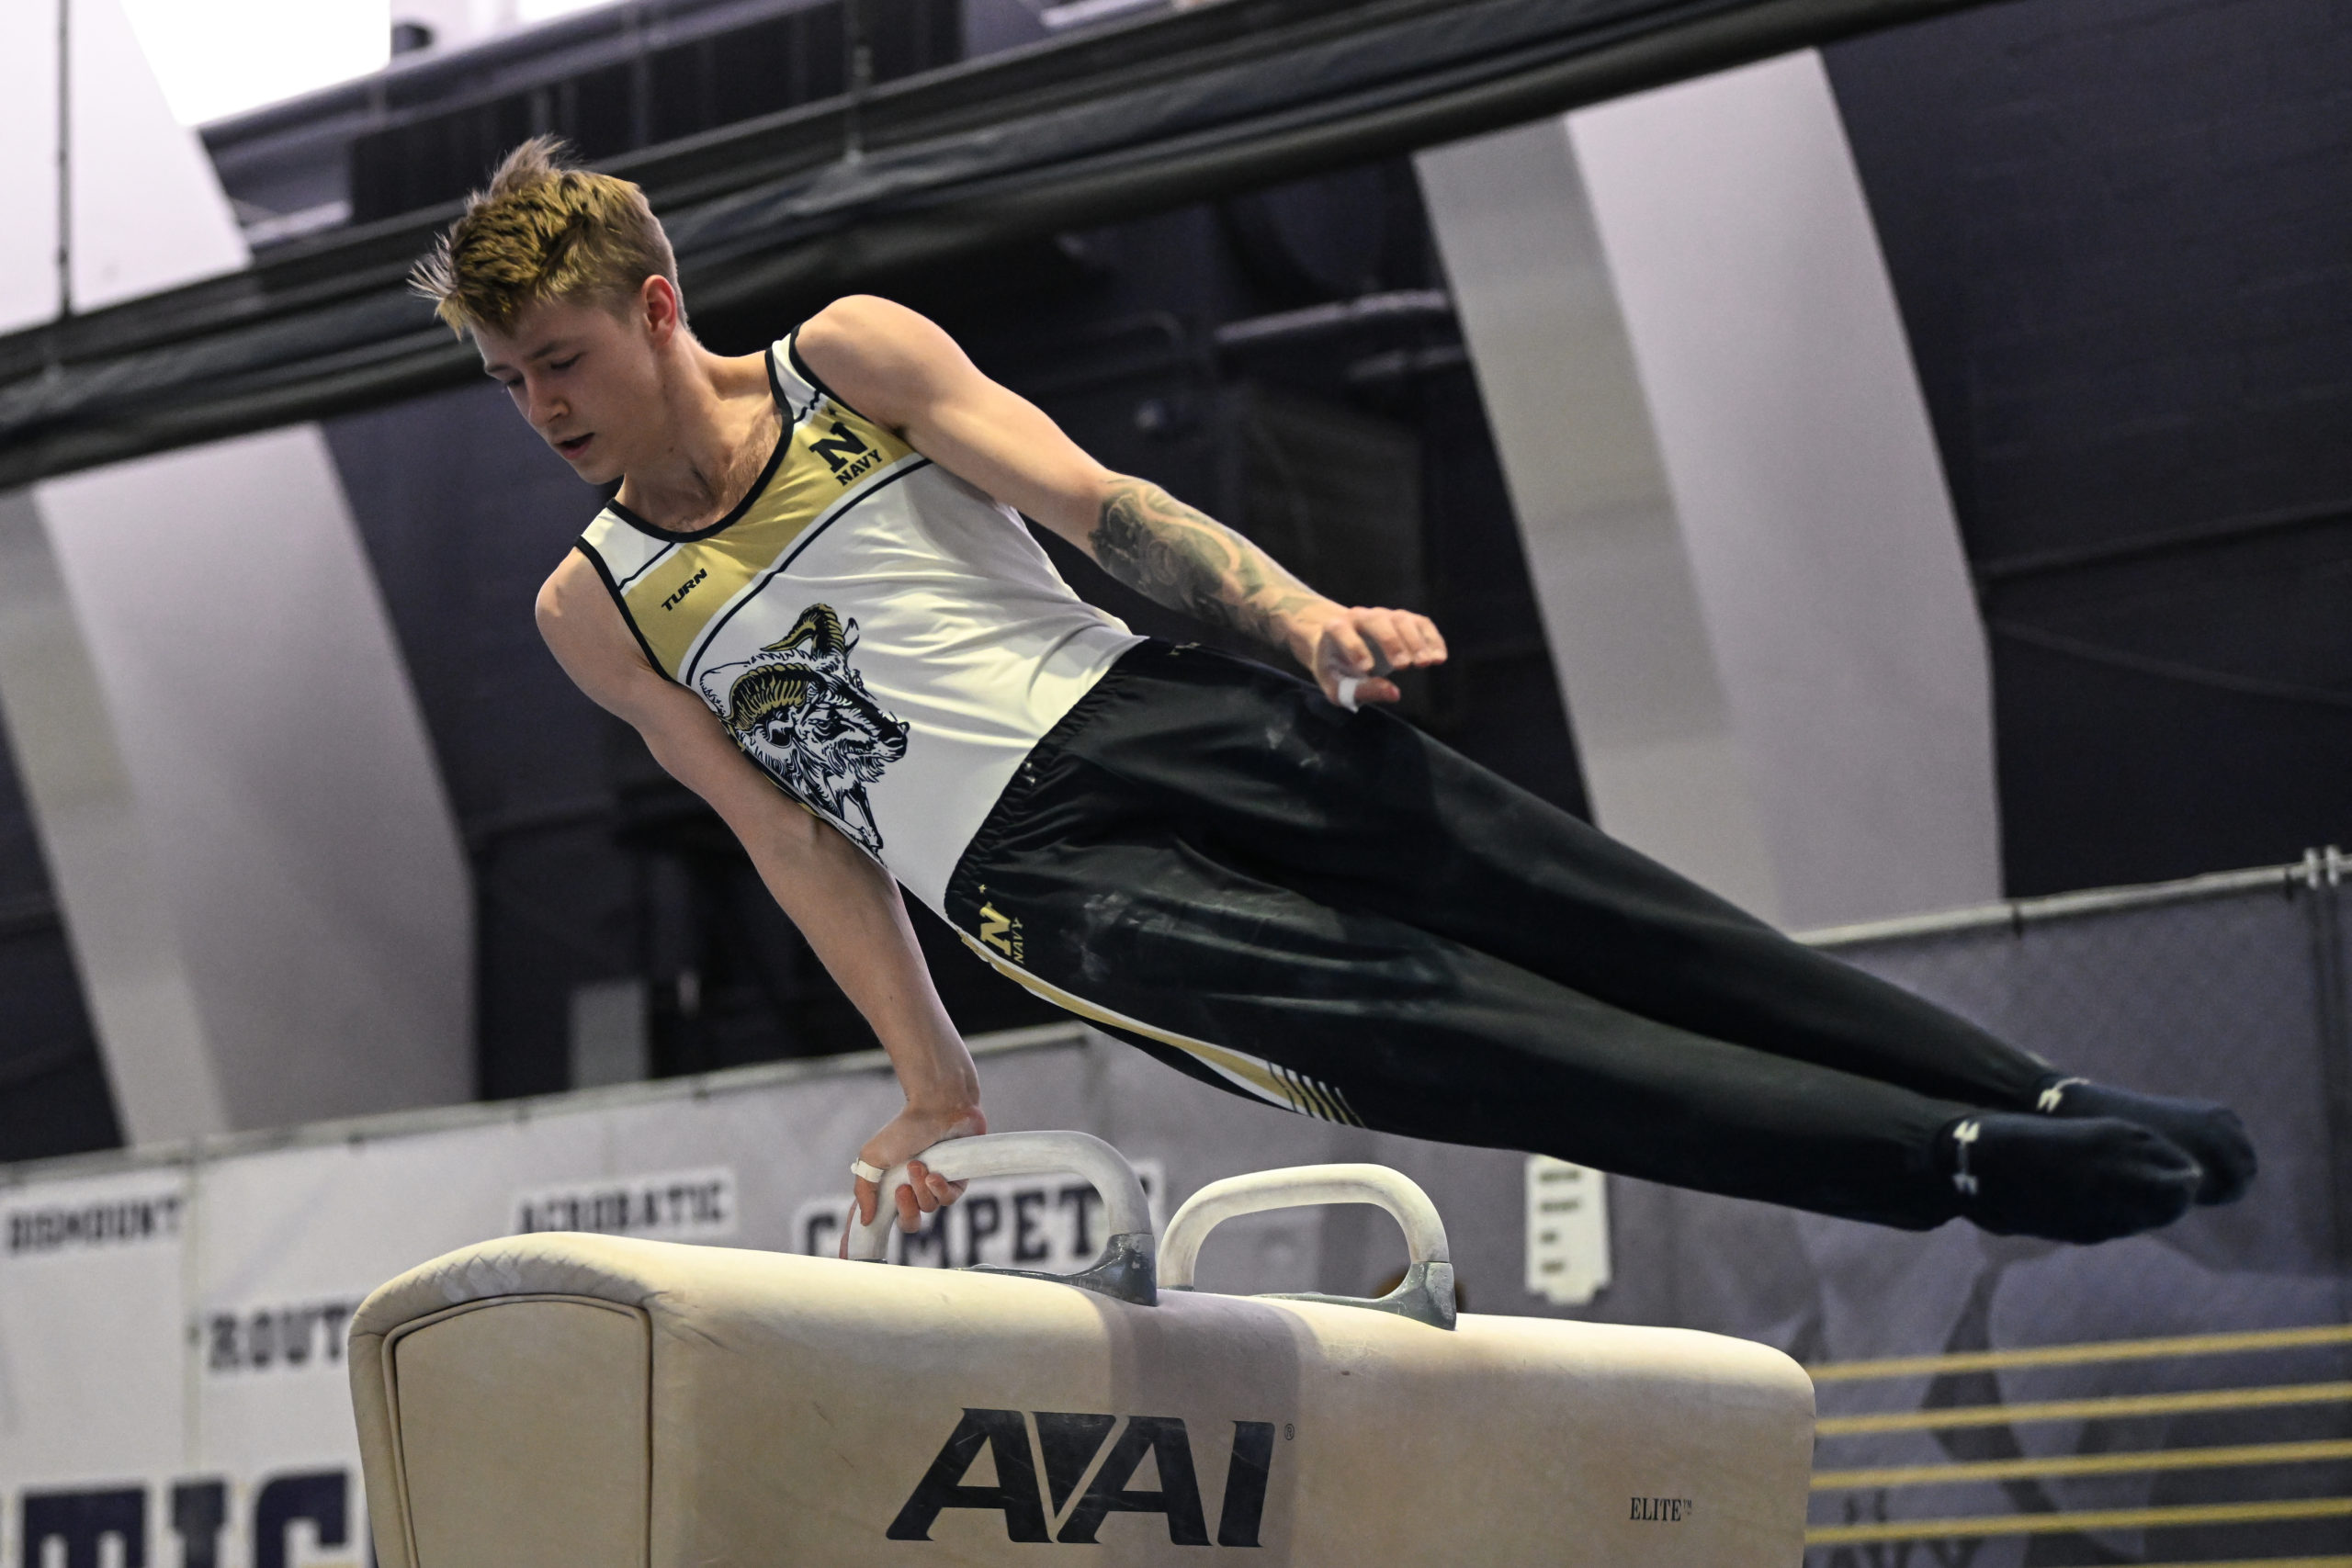 Navy's Ronan McQuillan competes on pommel horse during a home meet against Stanford and Air Force on March 11, 2023.